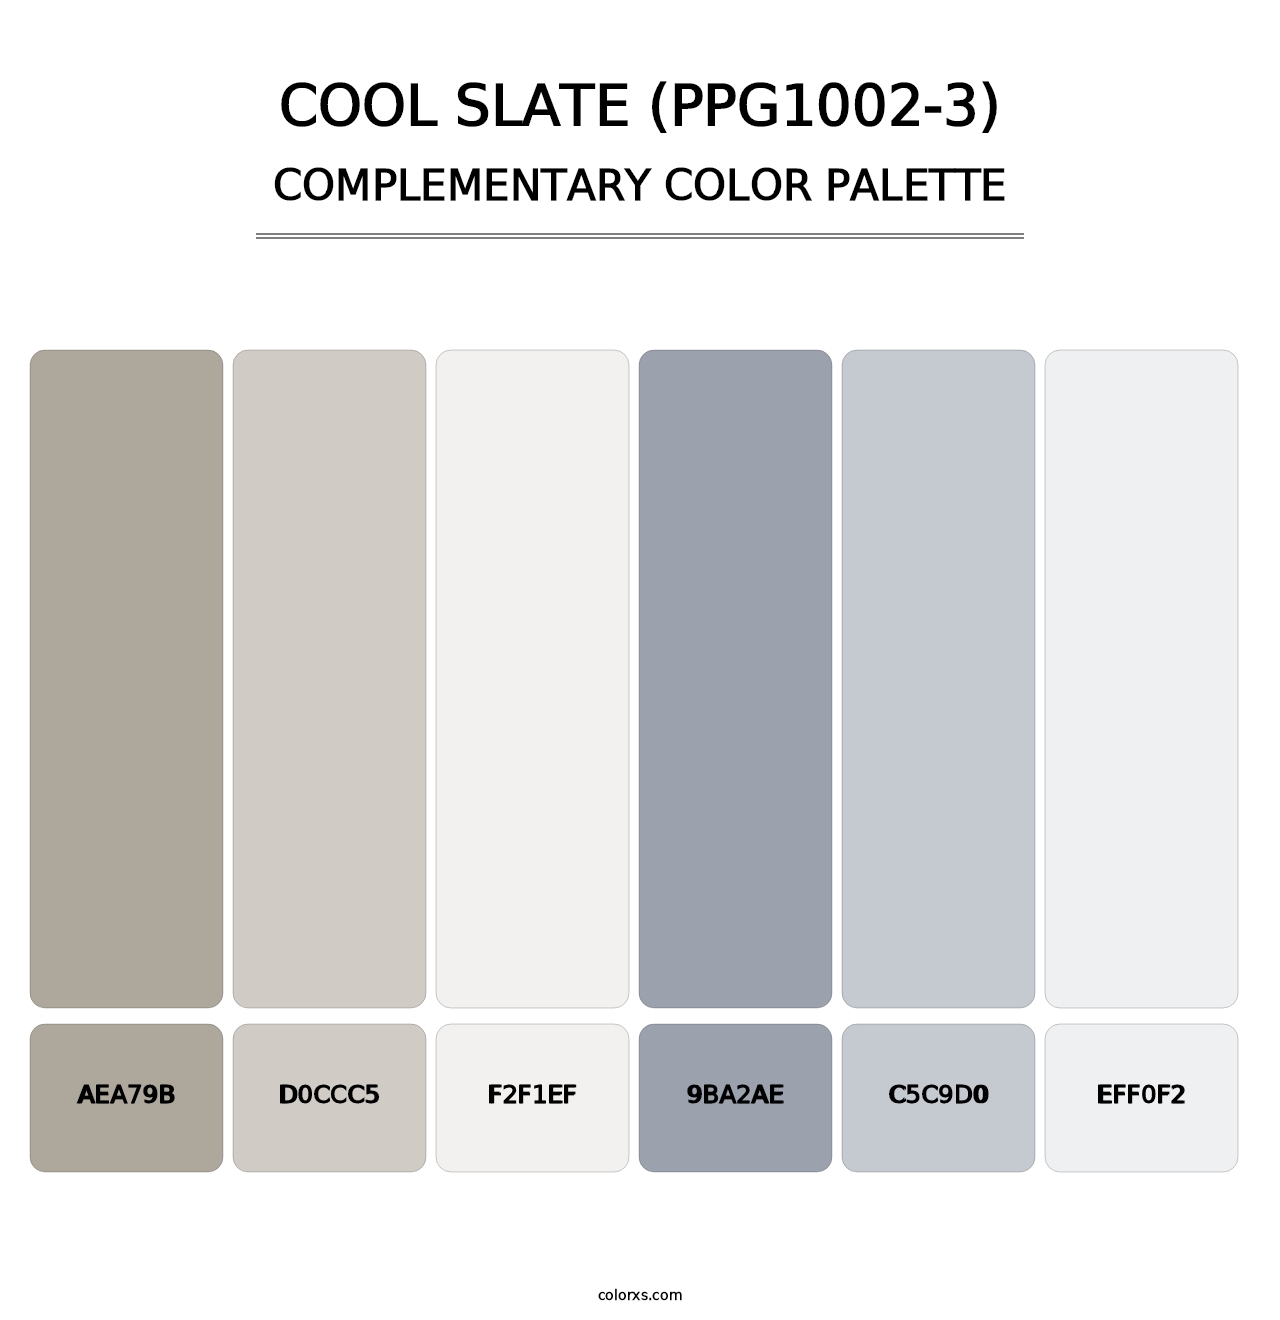 Cool Slate (PPG1002-3) - Complementary Color Palette